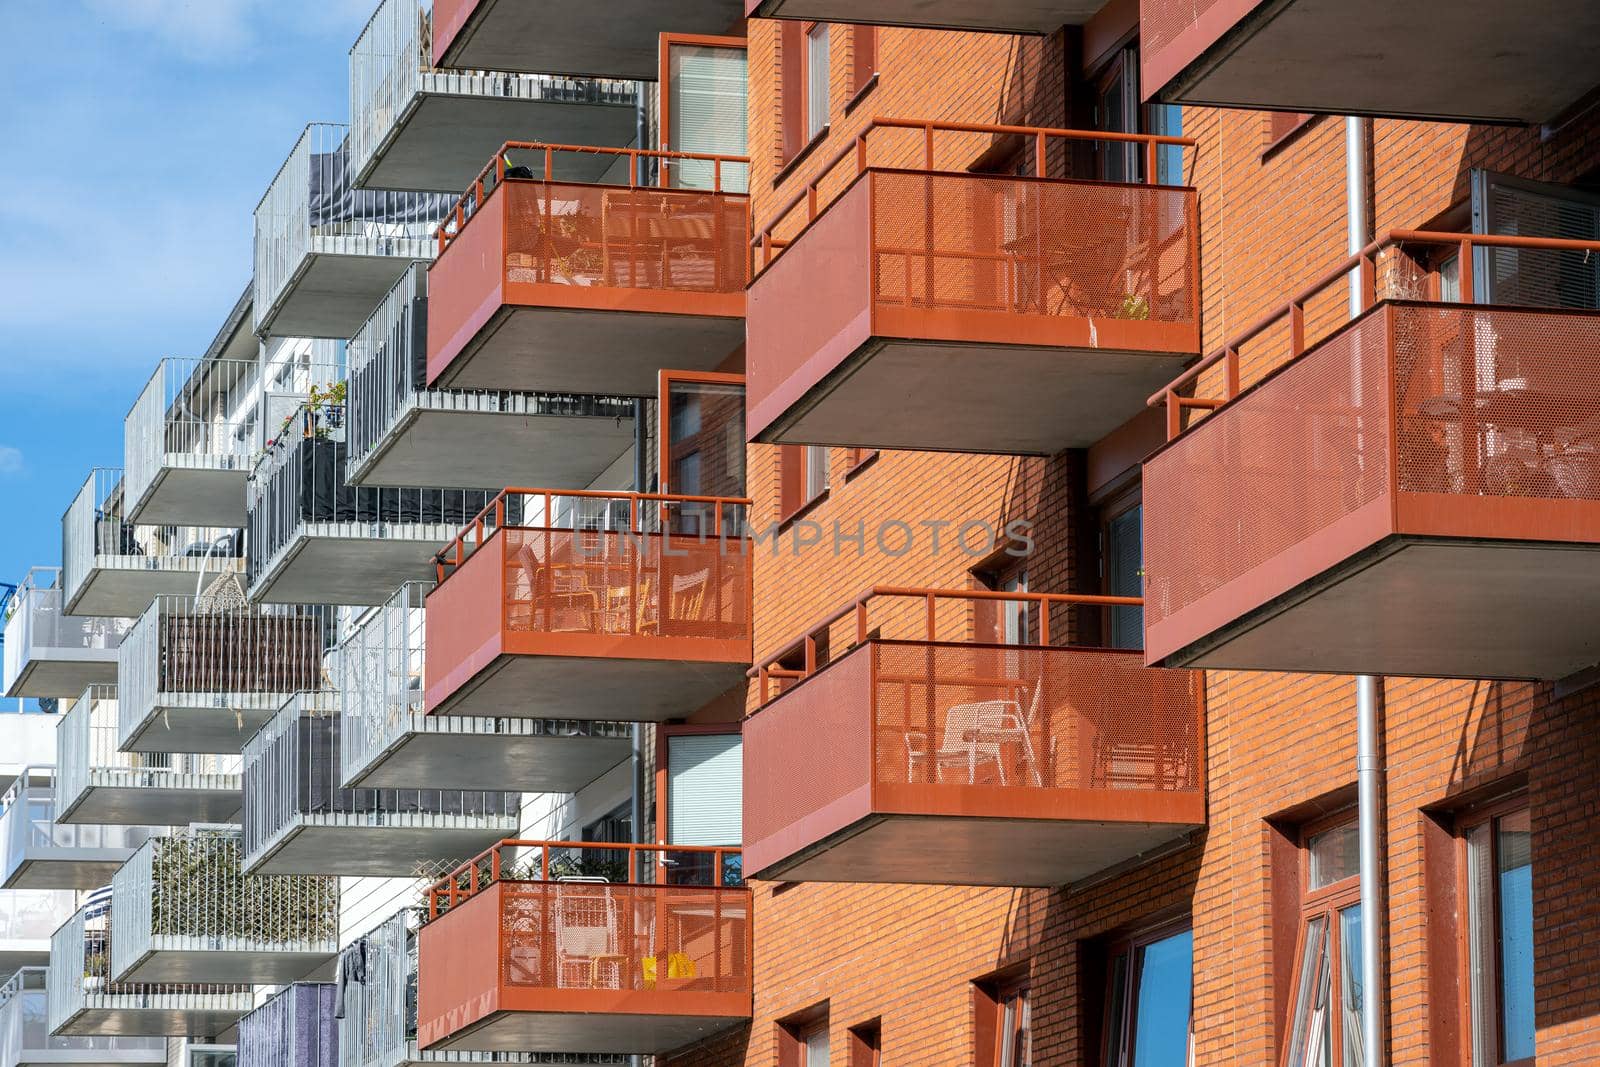 Detail of red and white apartment buildings with many balconies seen in Berlin, Germany